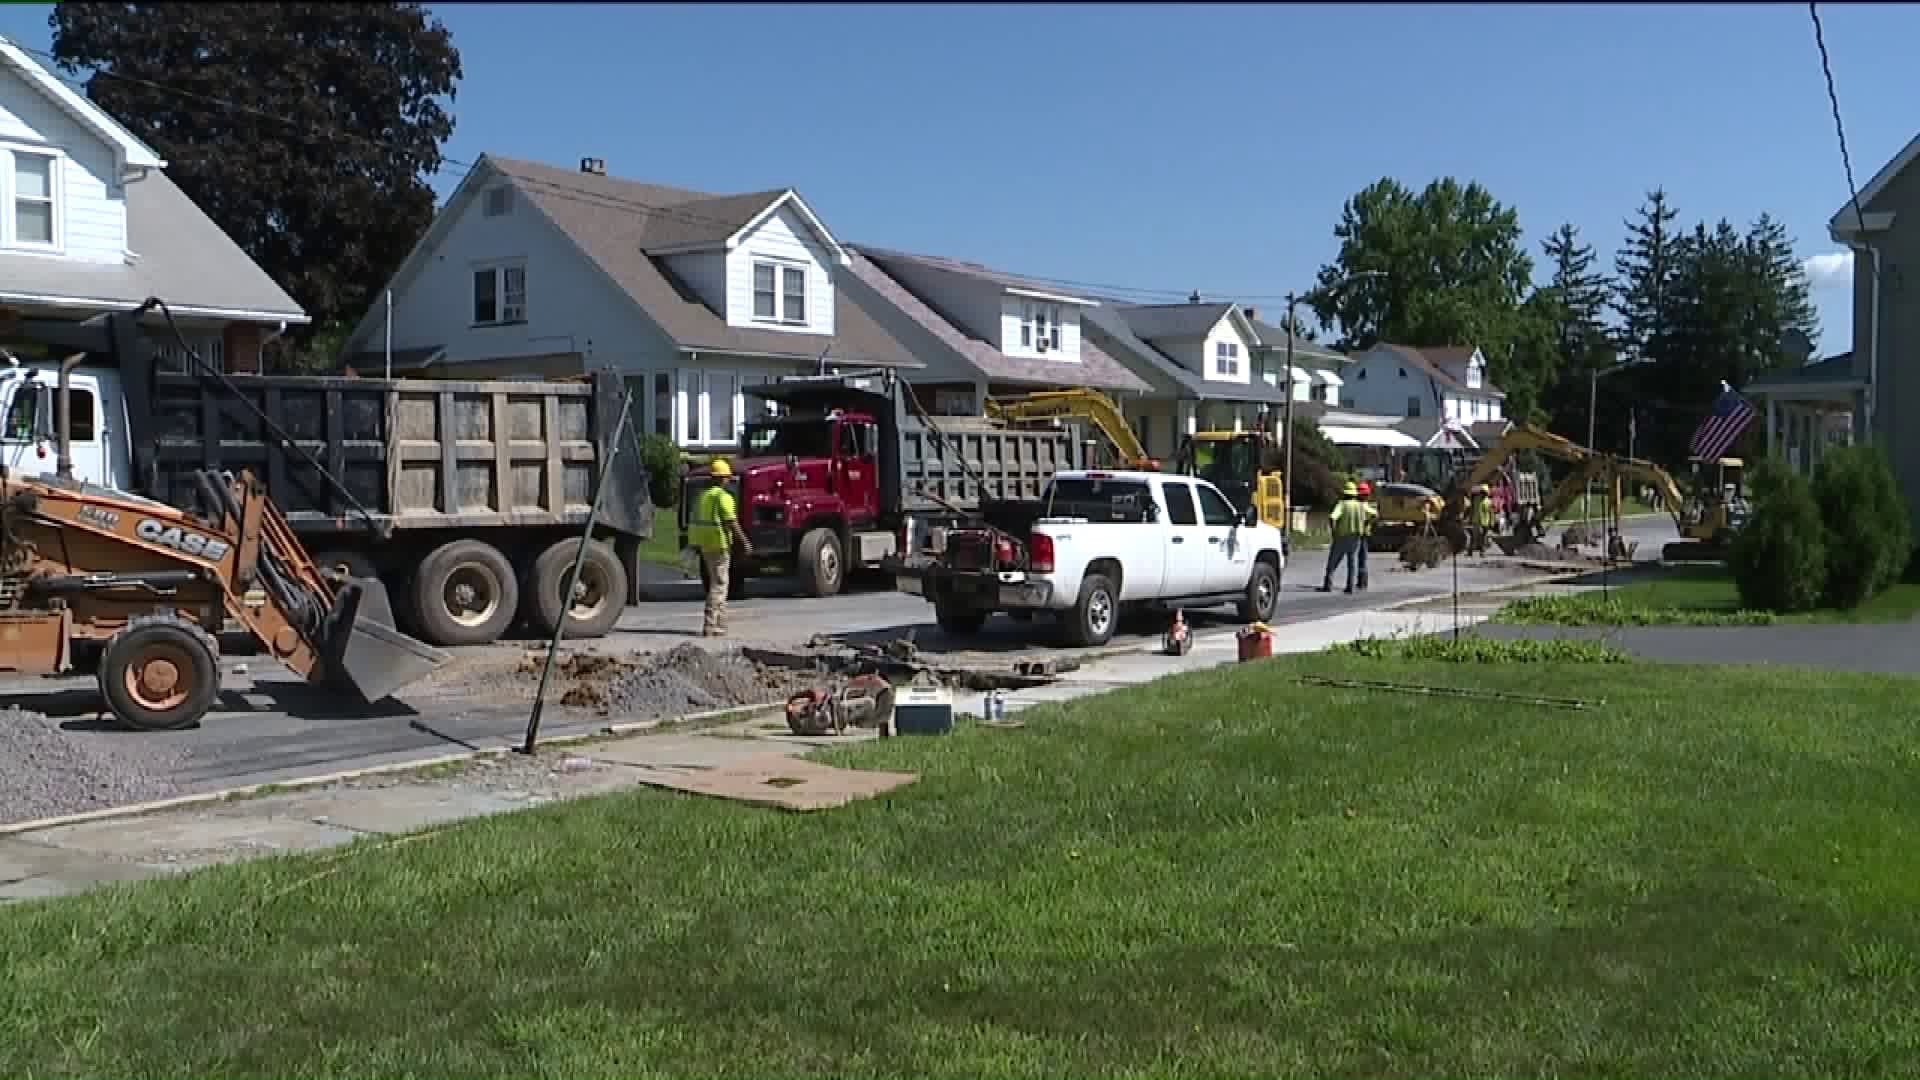 Water Main Project Shuts Down Section of Road in Lehighton